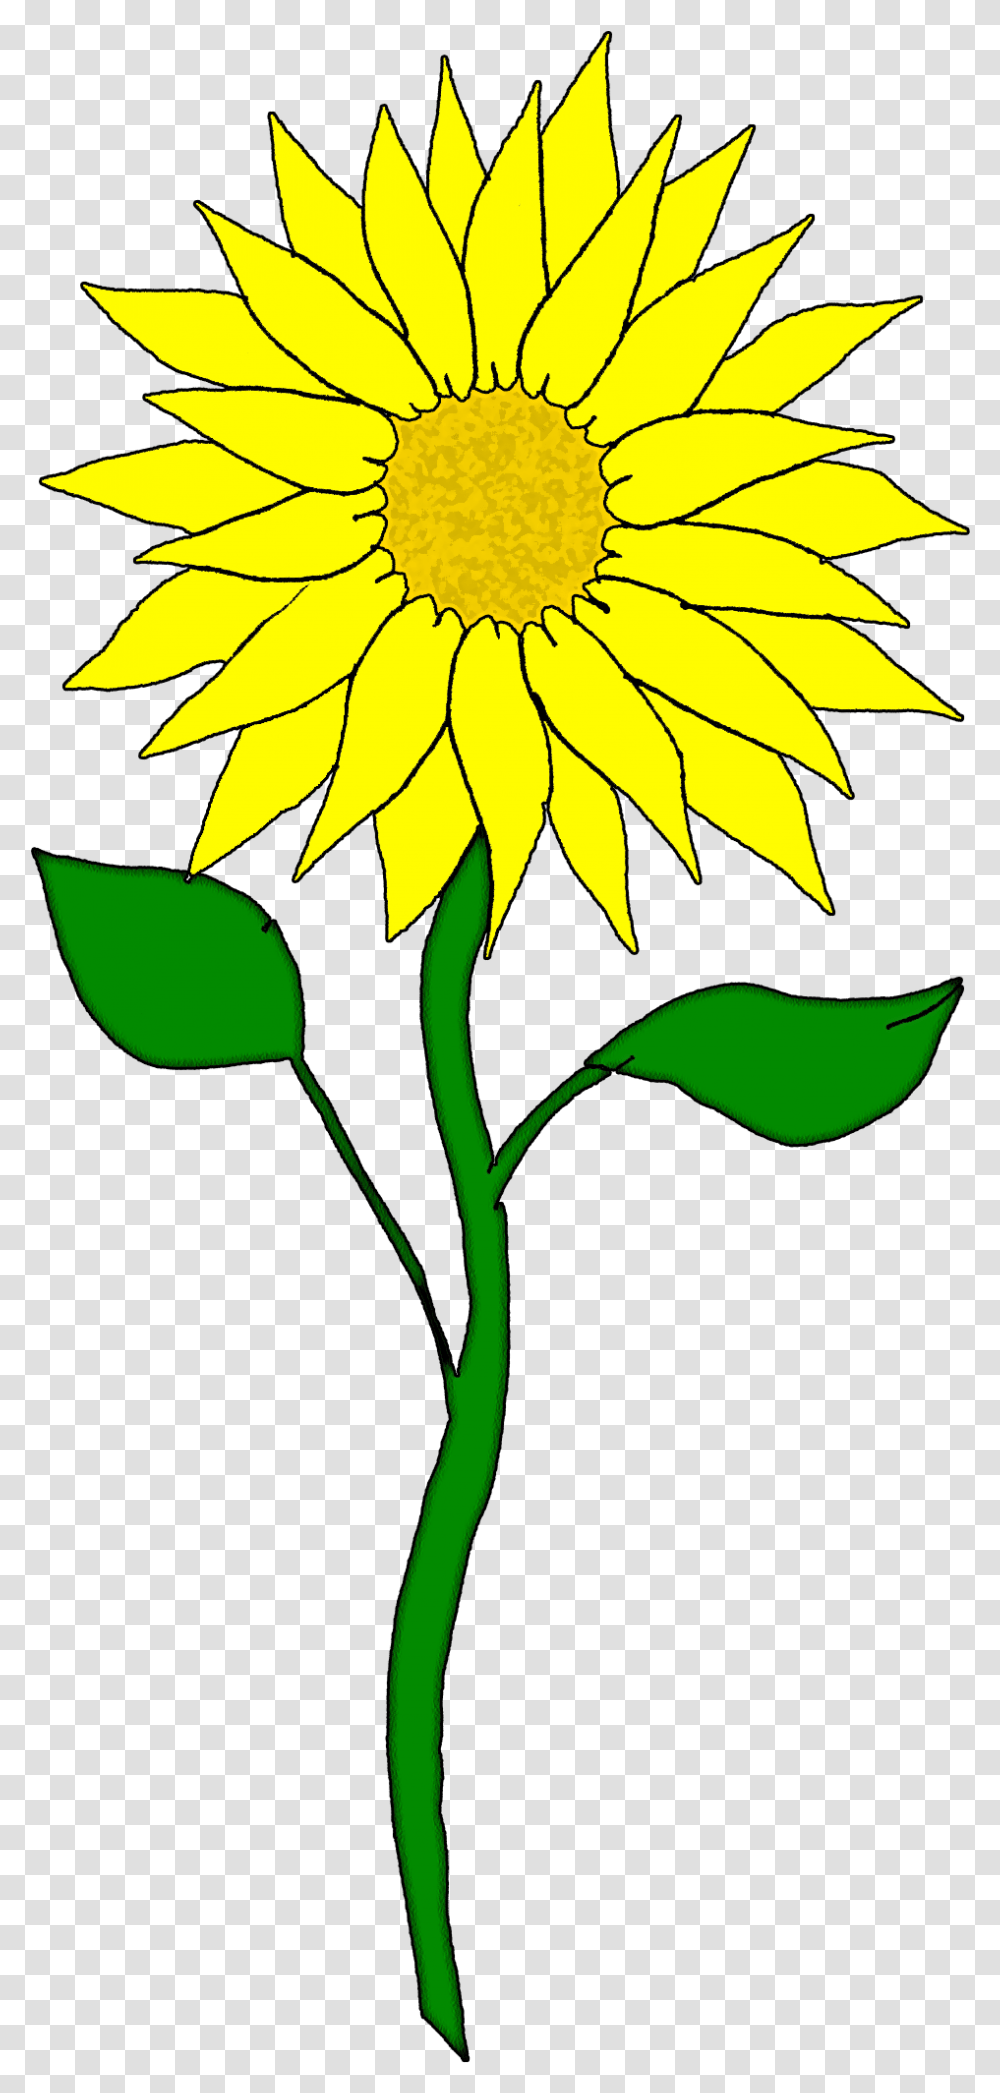 Download Sunflower Images 2 Image Clipart Free Cliparts Sunflowers, Plant, Blossom, Petal, Daisy Transparent Png